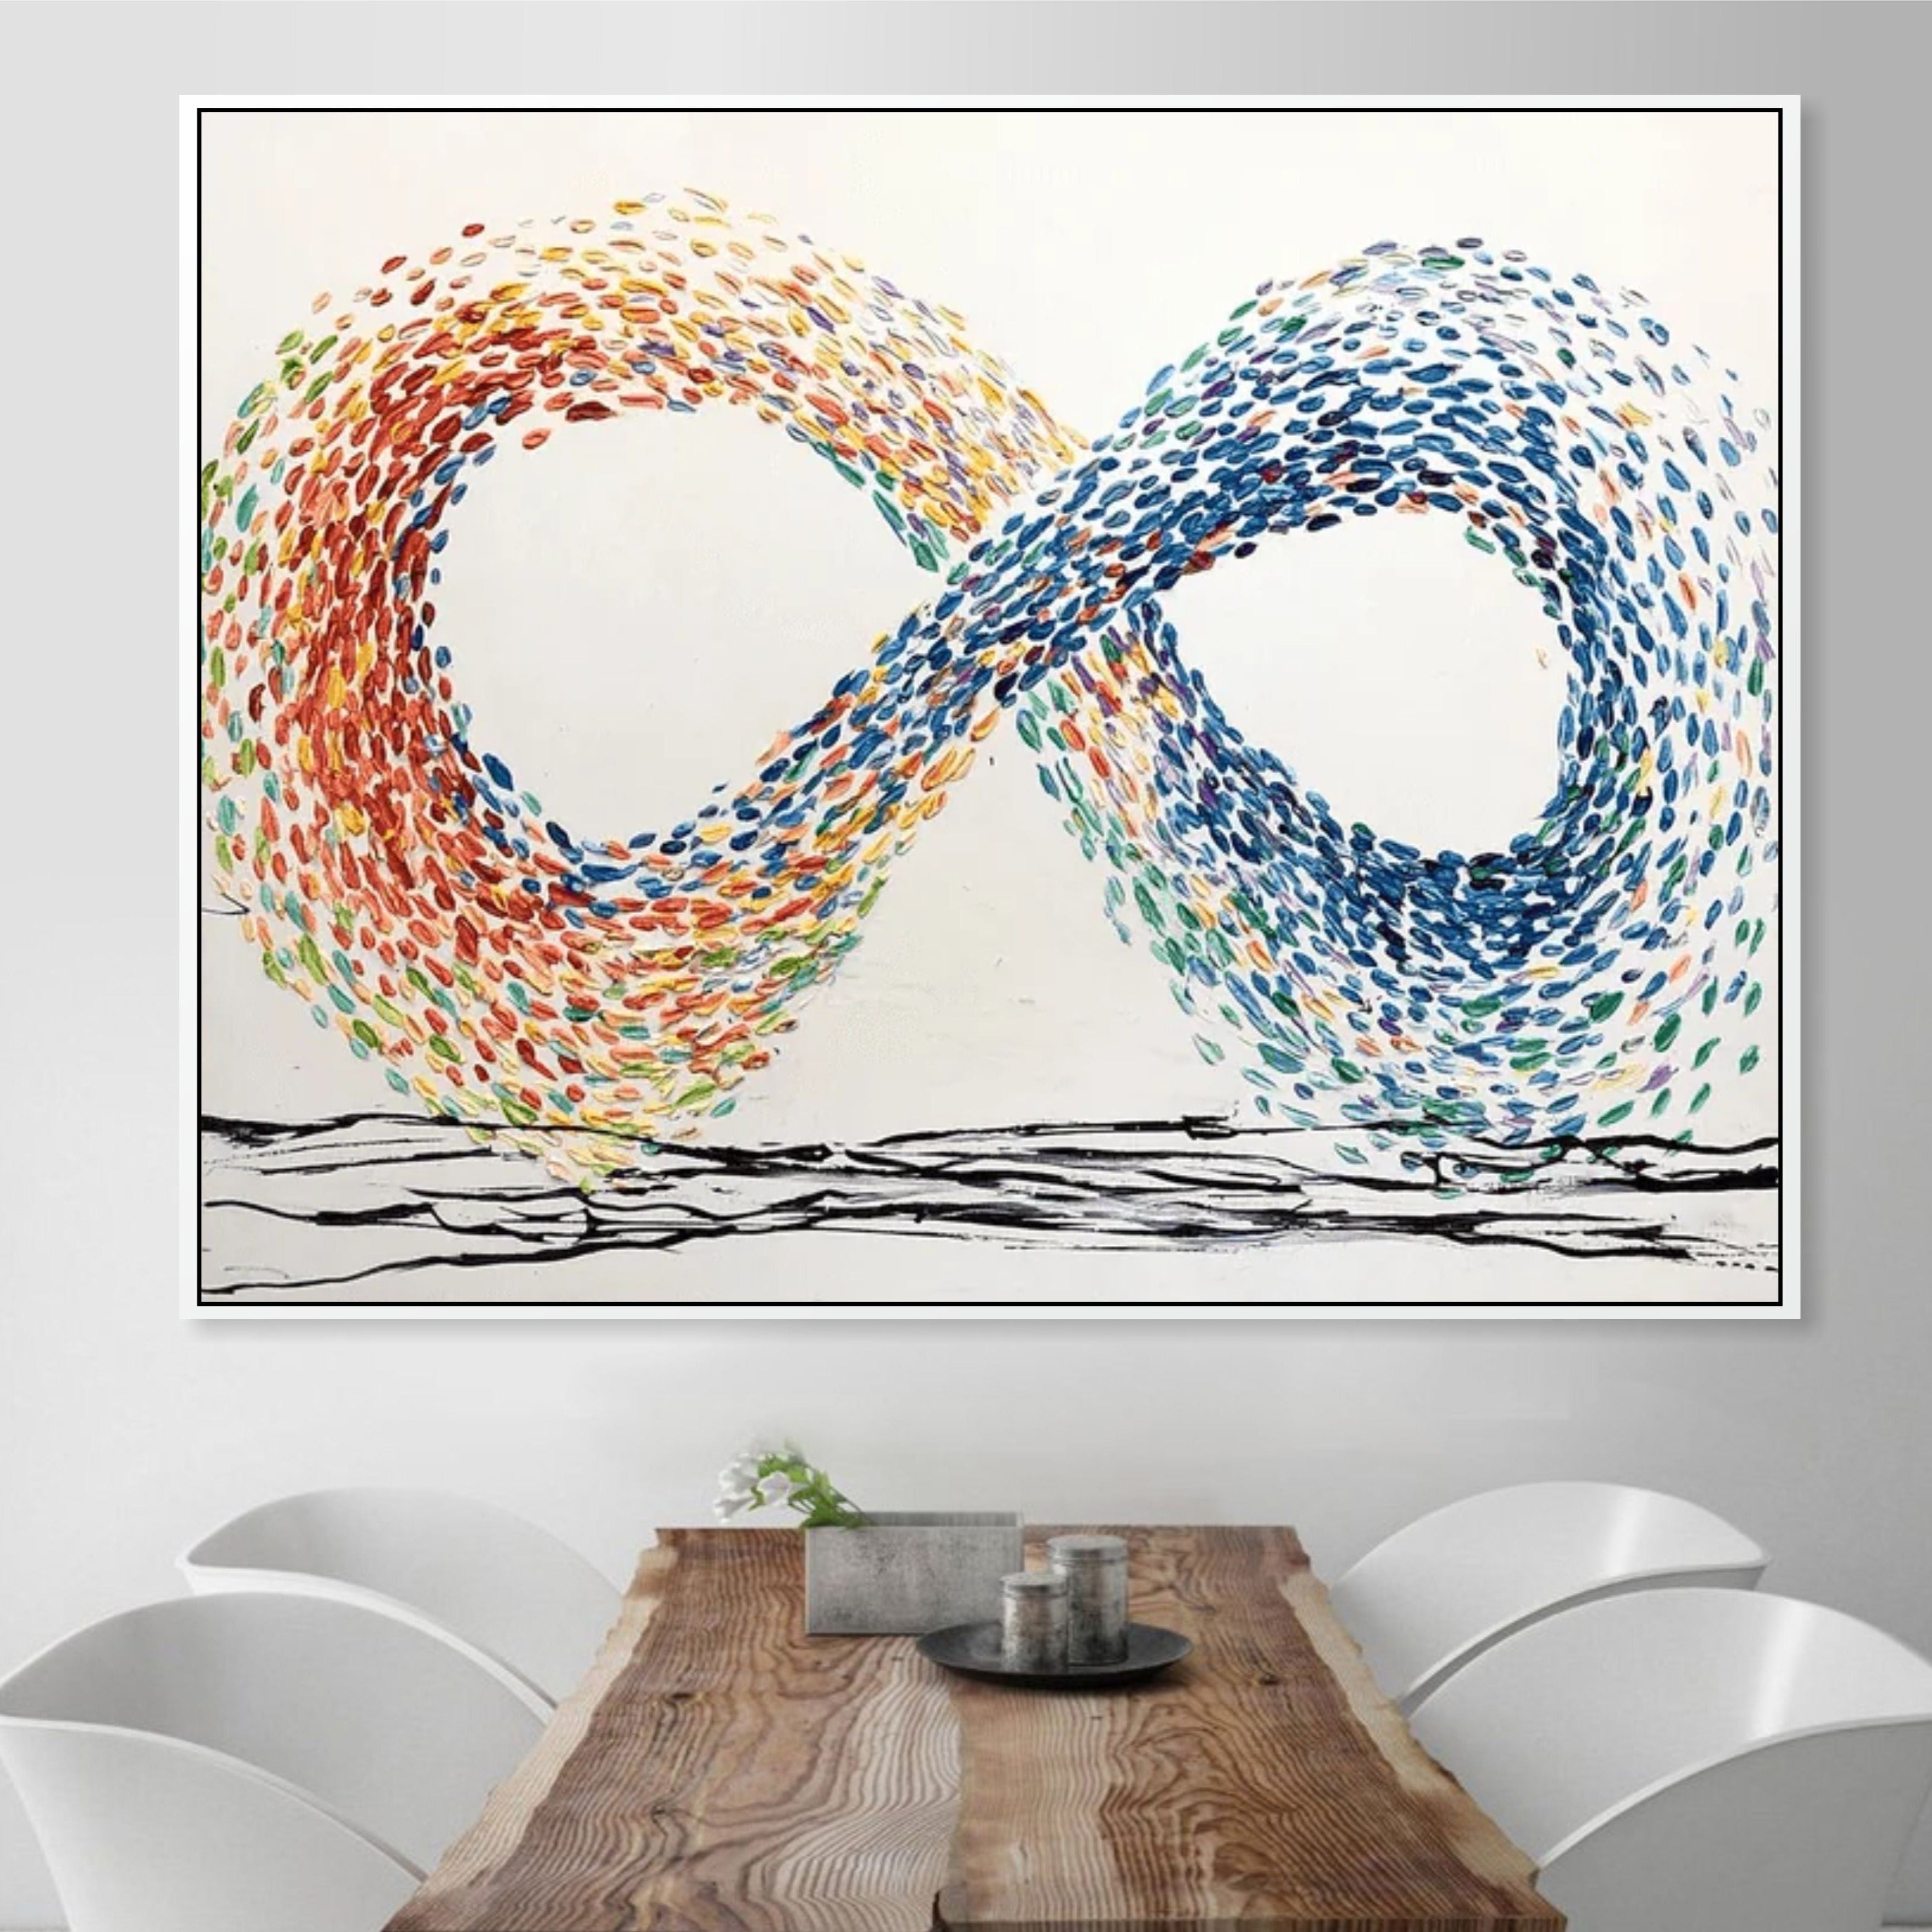 INFINITY REMIX from $340